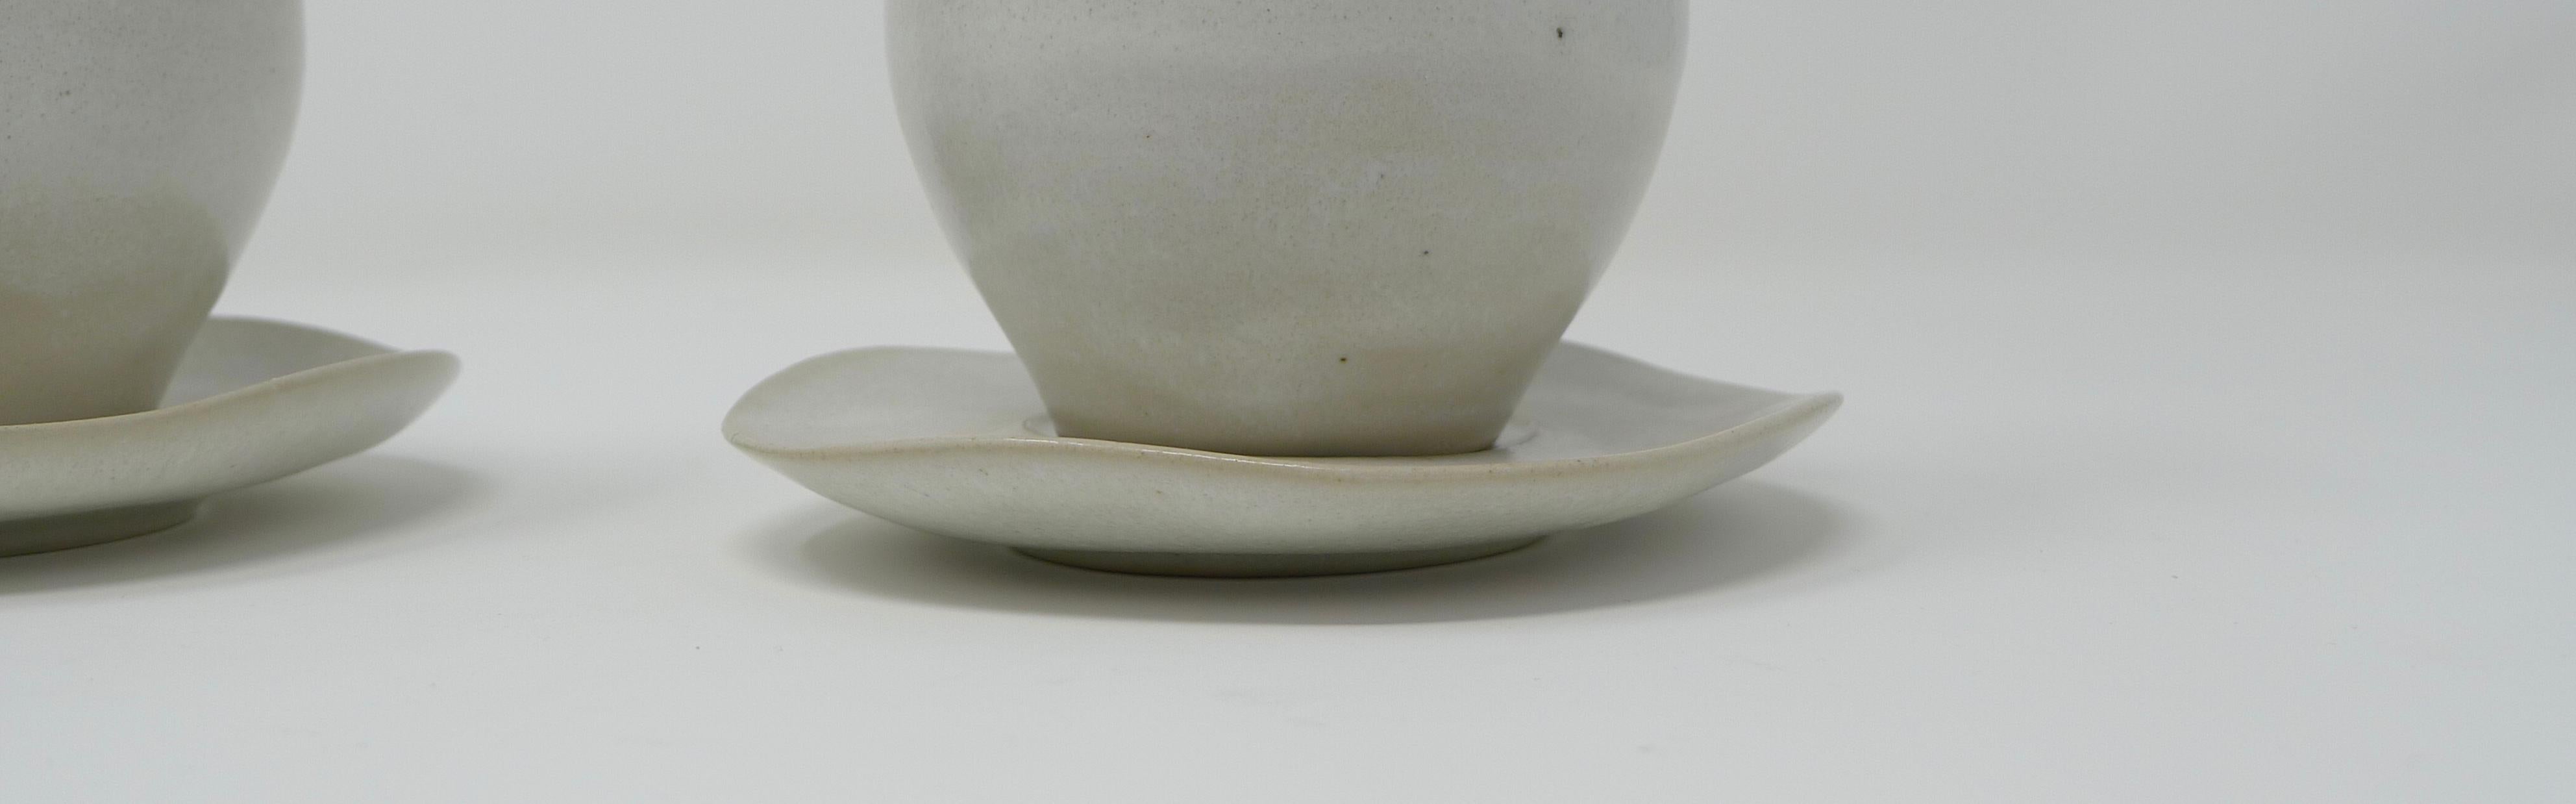 British Lucie Rie, Oil and Vinegar Set in White Glaze, Fully Signed, Early 1950s